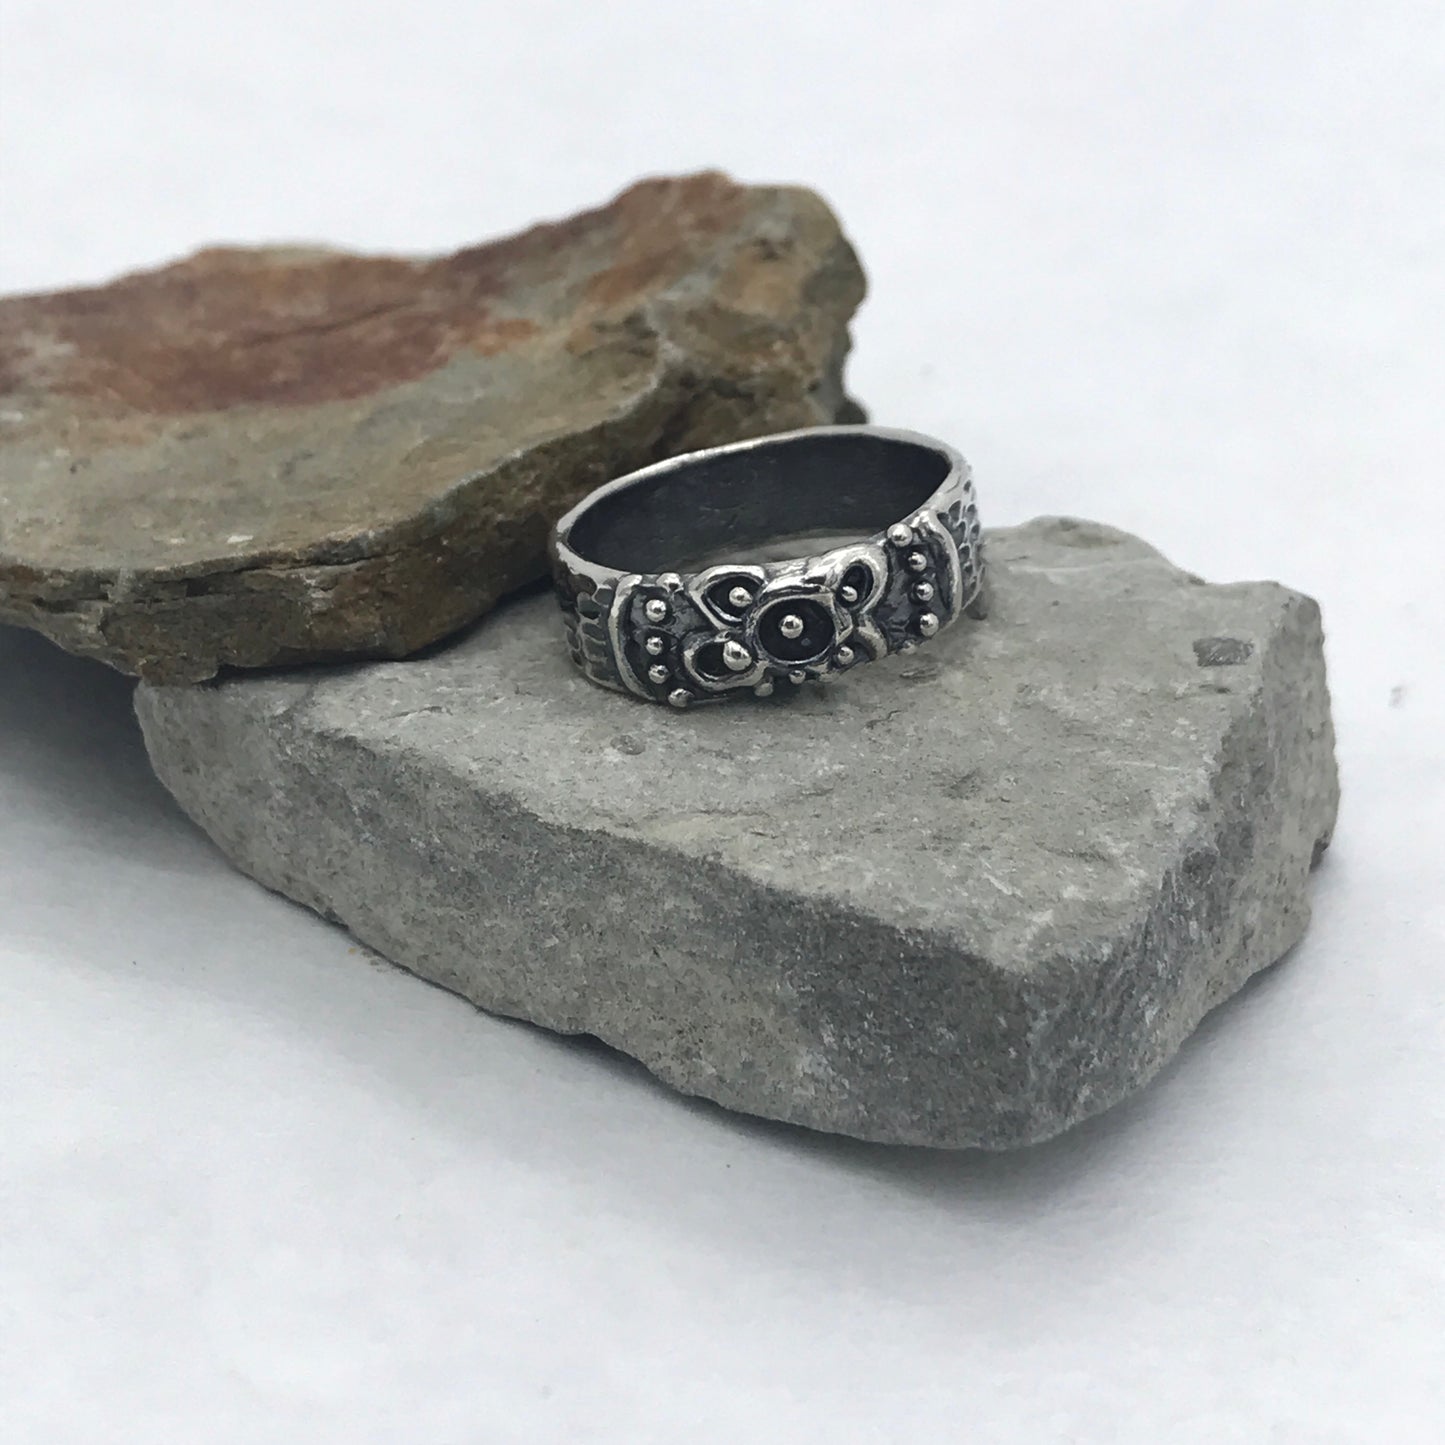 Centered Flower with textured band- Sterling Silver ring